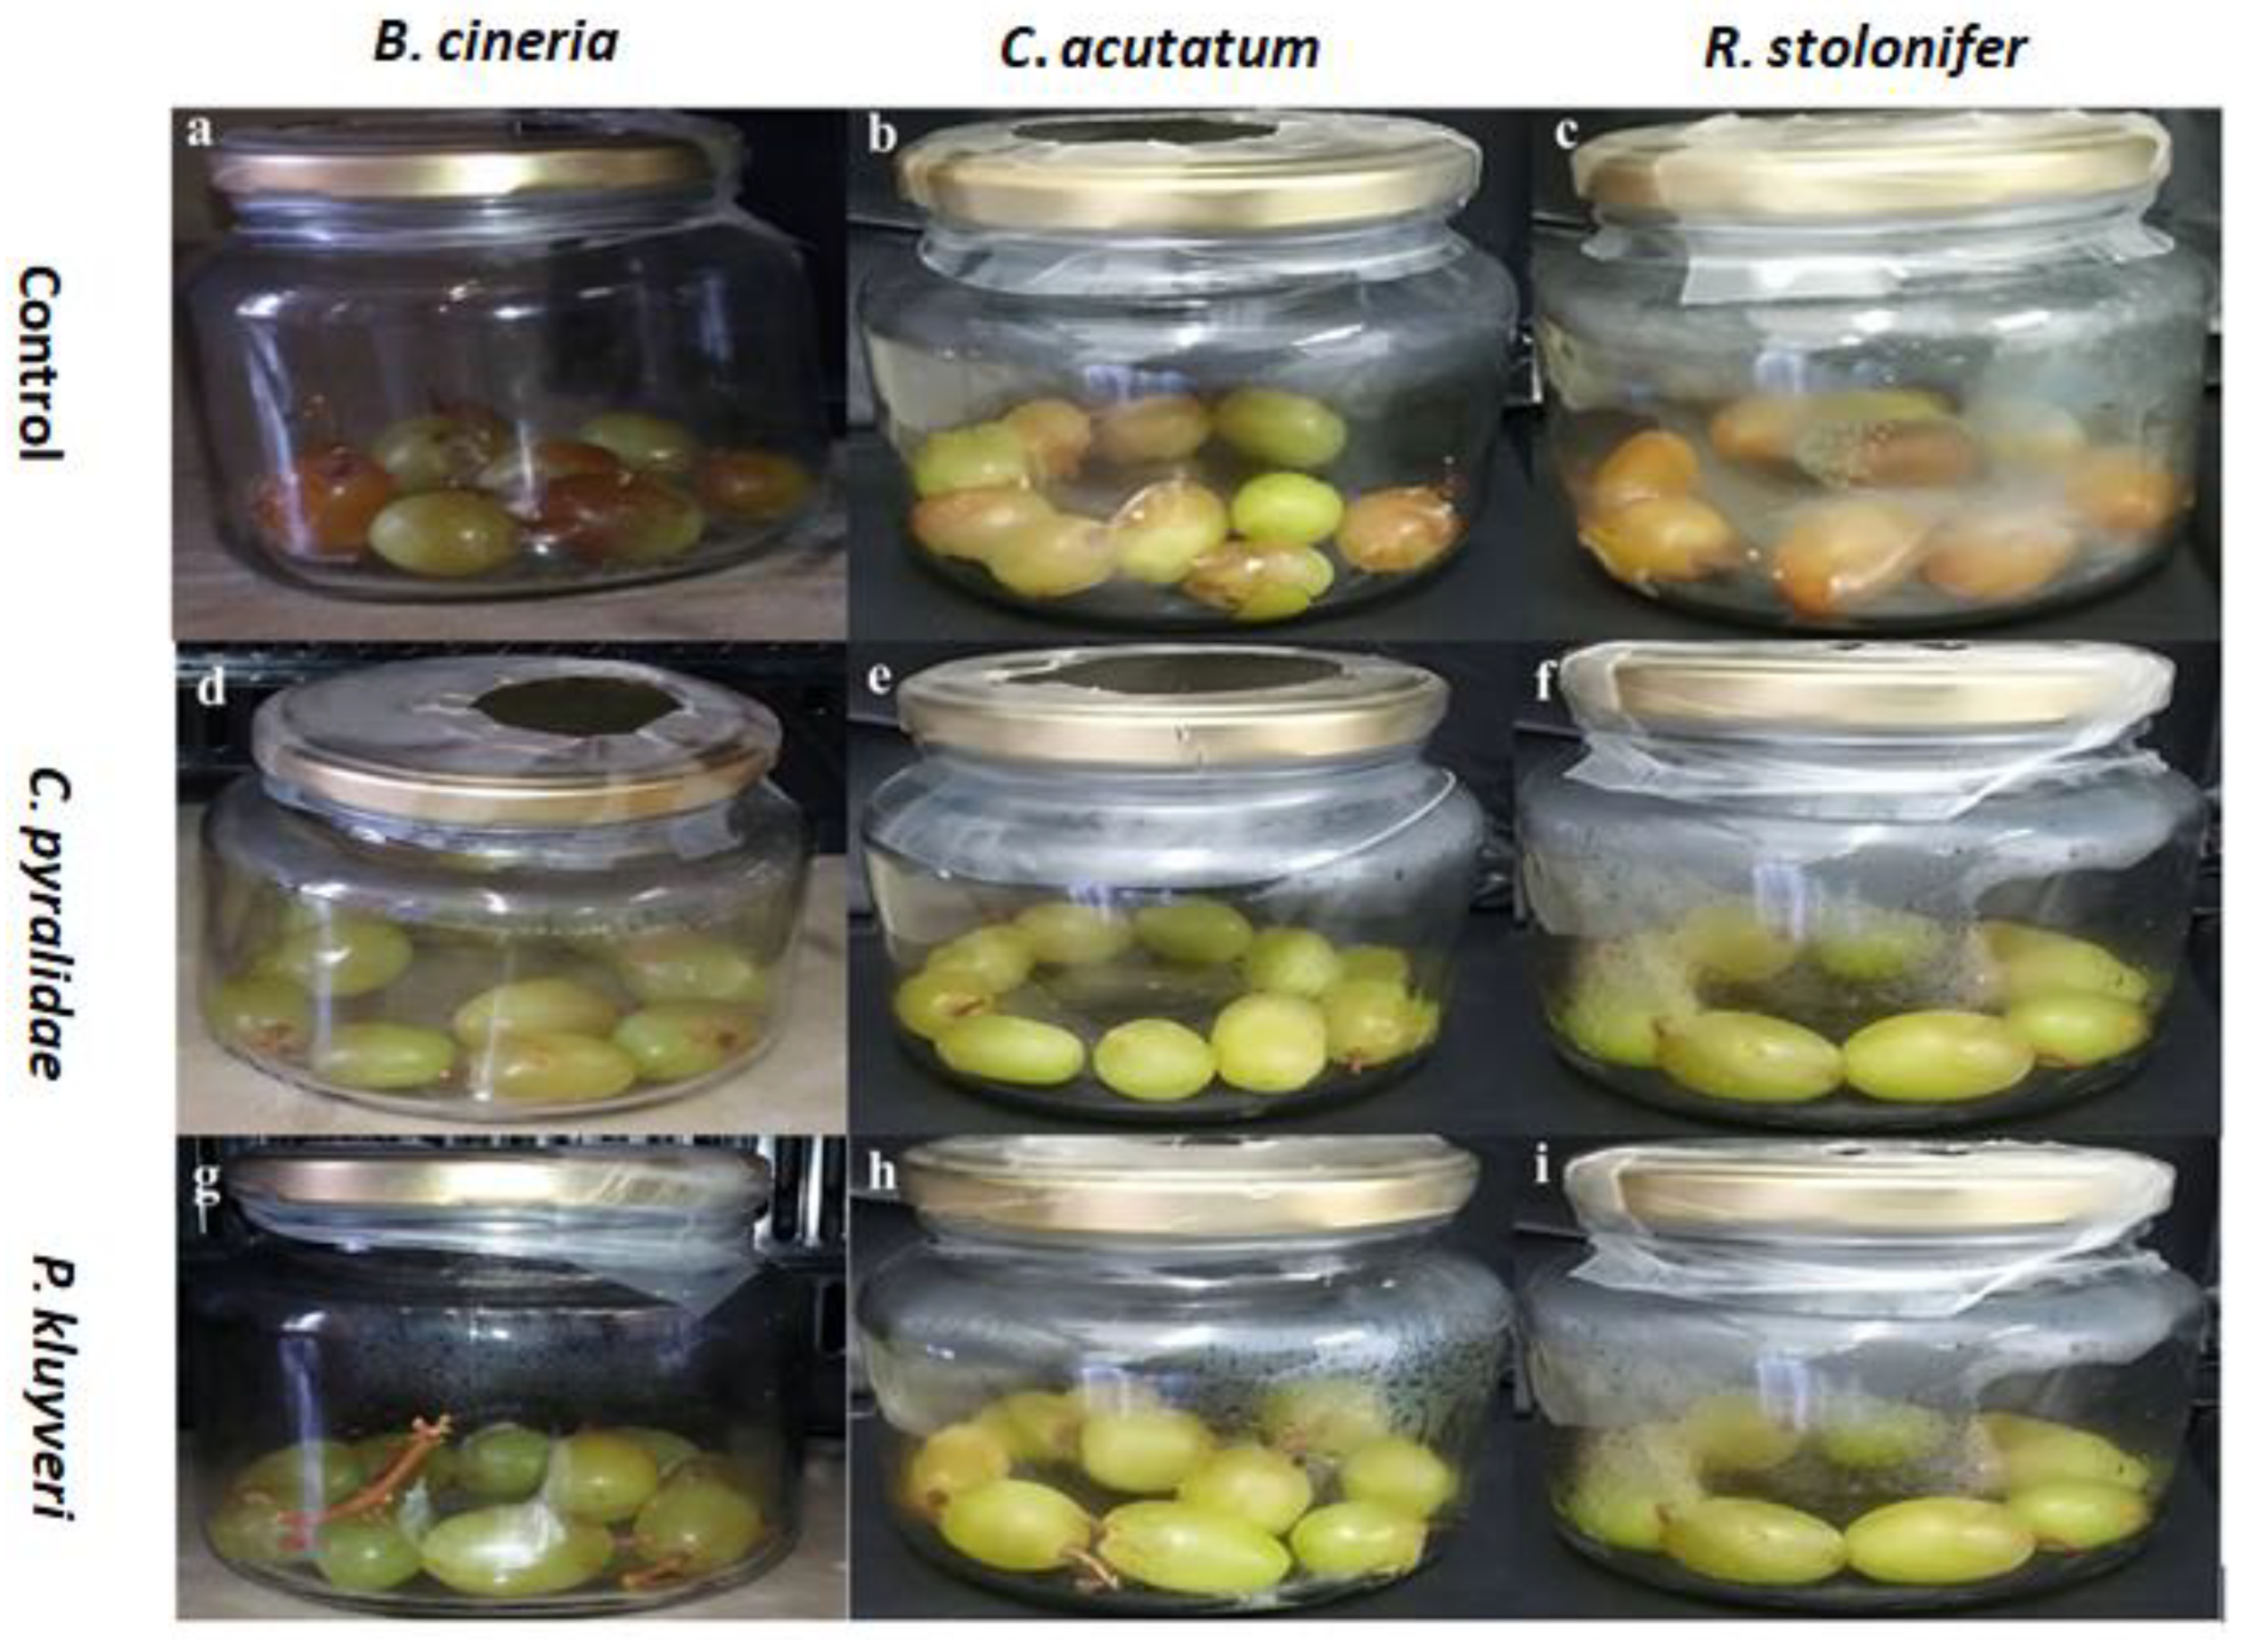 Foods Free Full Text The Use Of Candida Pyralidae And Pichia Kluyveri To Control Spoilage Microorganisms Of Raw Fruits Used For Beverage Production Html